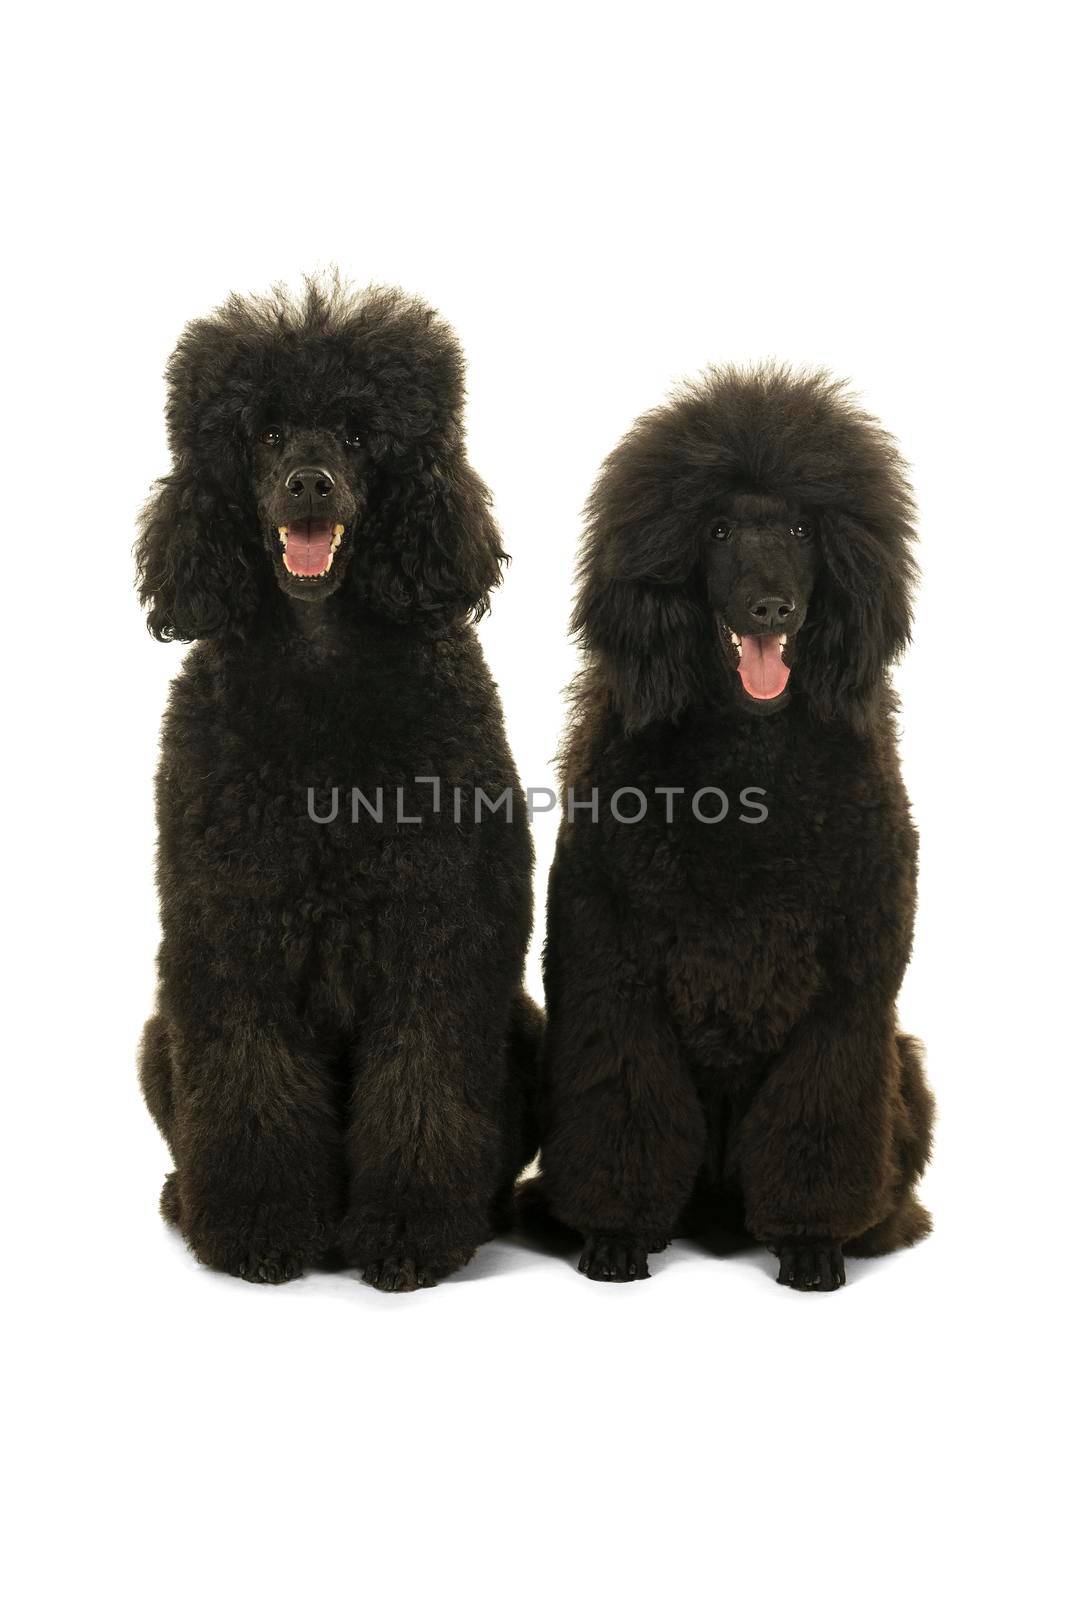 Two black king poodles isolated in white by LeoniekvanderVliet